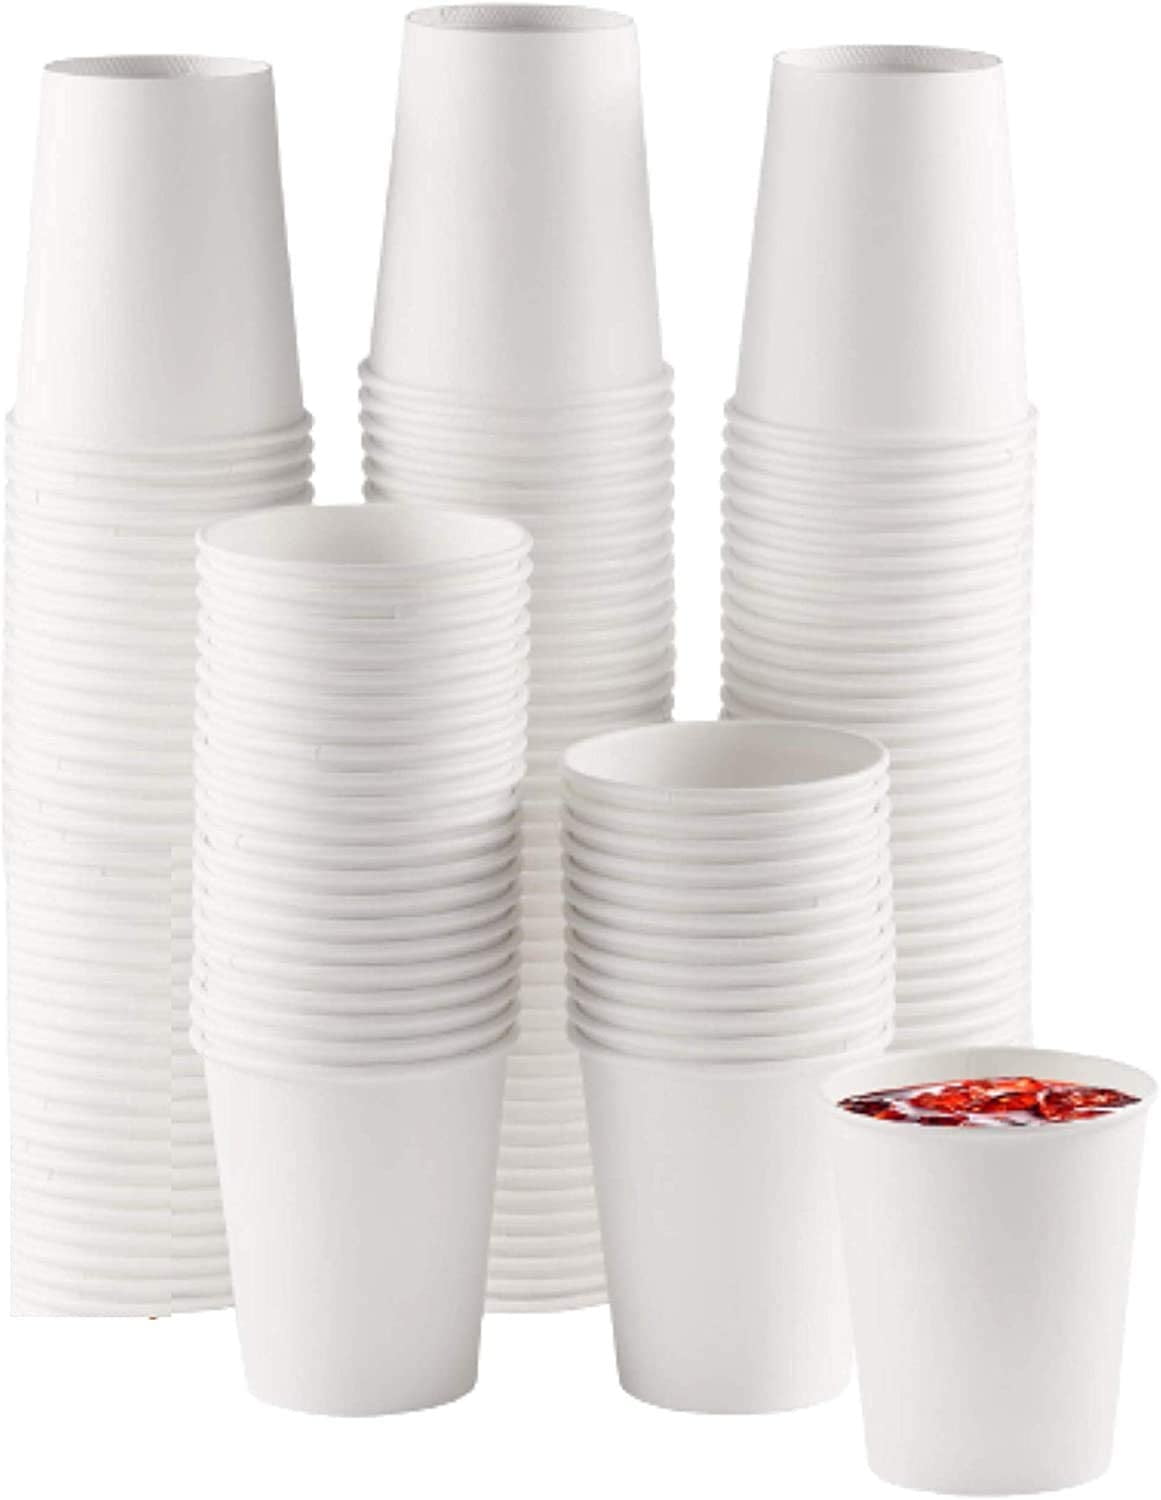 200 X Disposable Foam Cups Polystyrene Coffee Tea Cups for Hot Drinks 10oz 